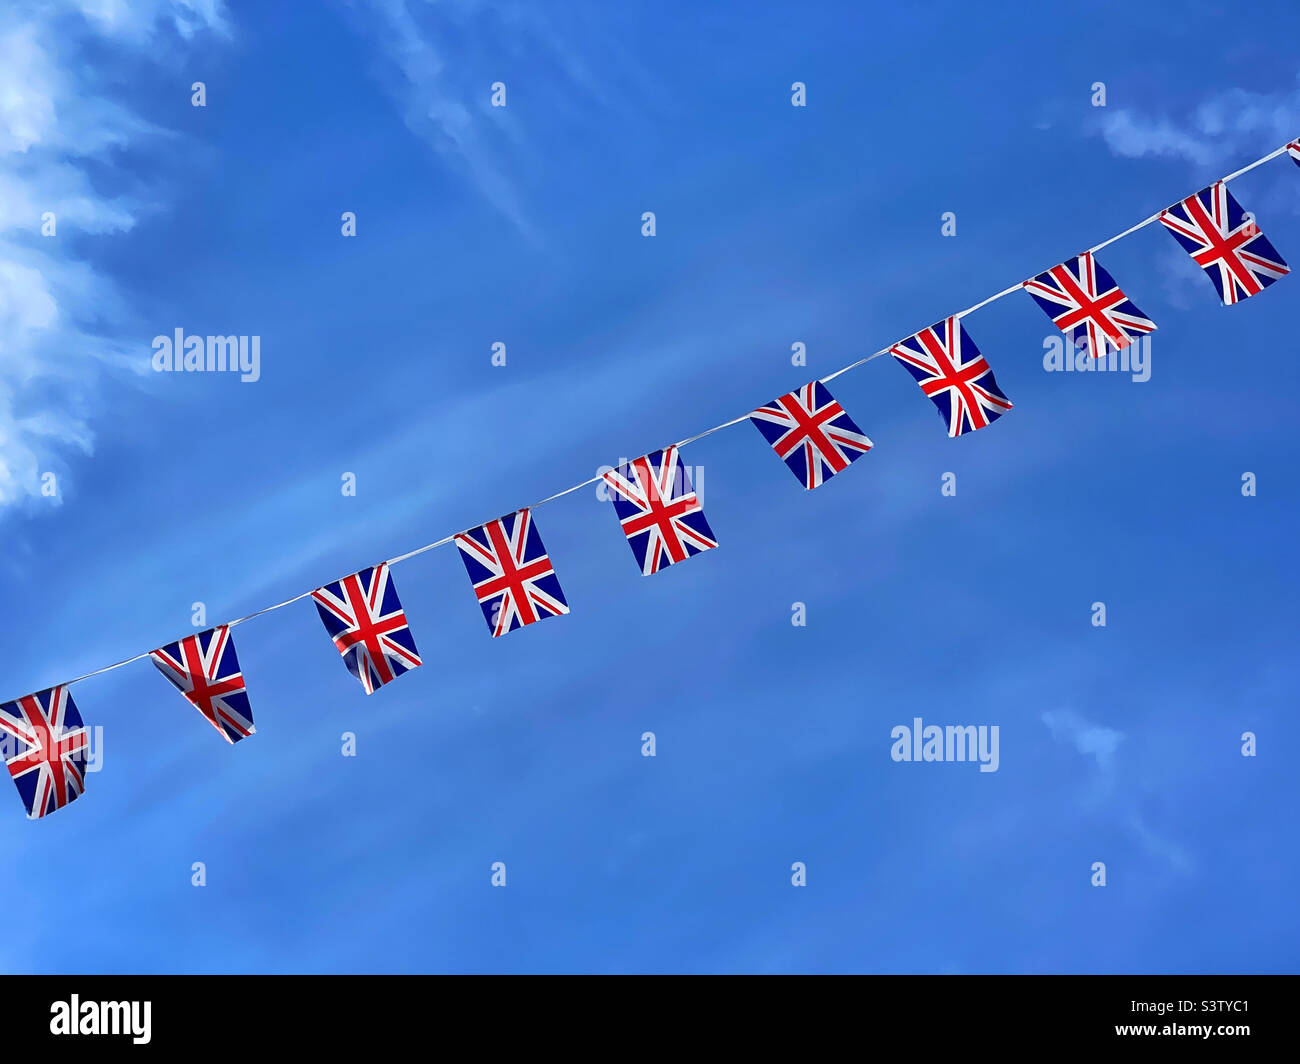 Union Jack bunting flapping in British summer’s day. A patriotic sight. Photo ©️ COLIN HOSKINS. Stock Photo